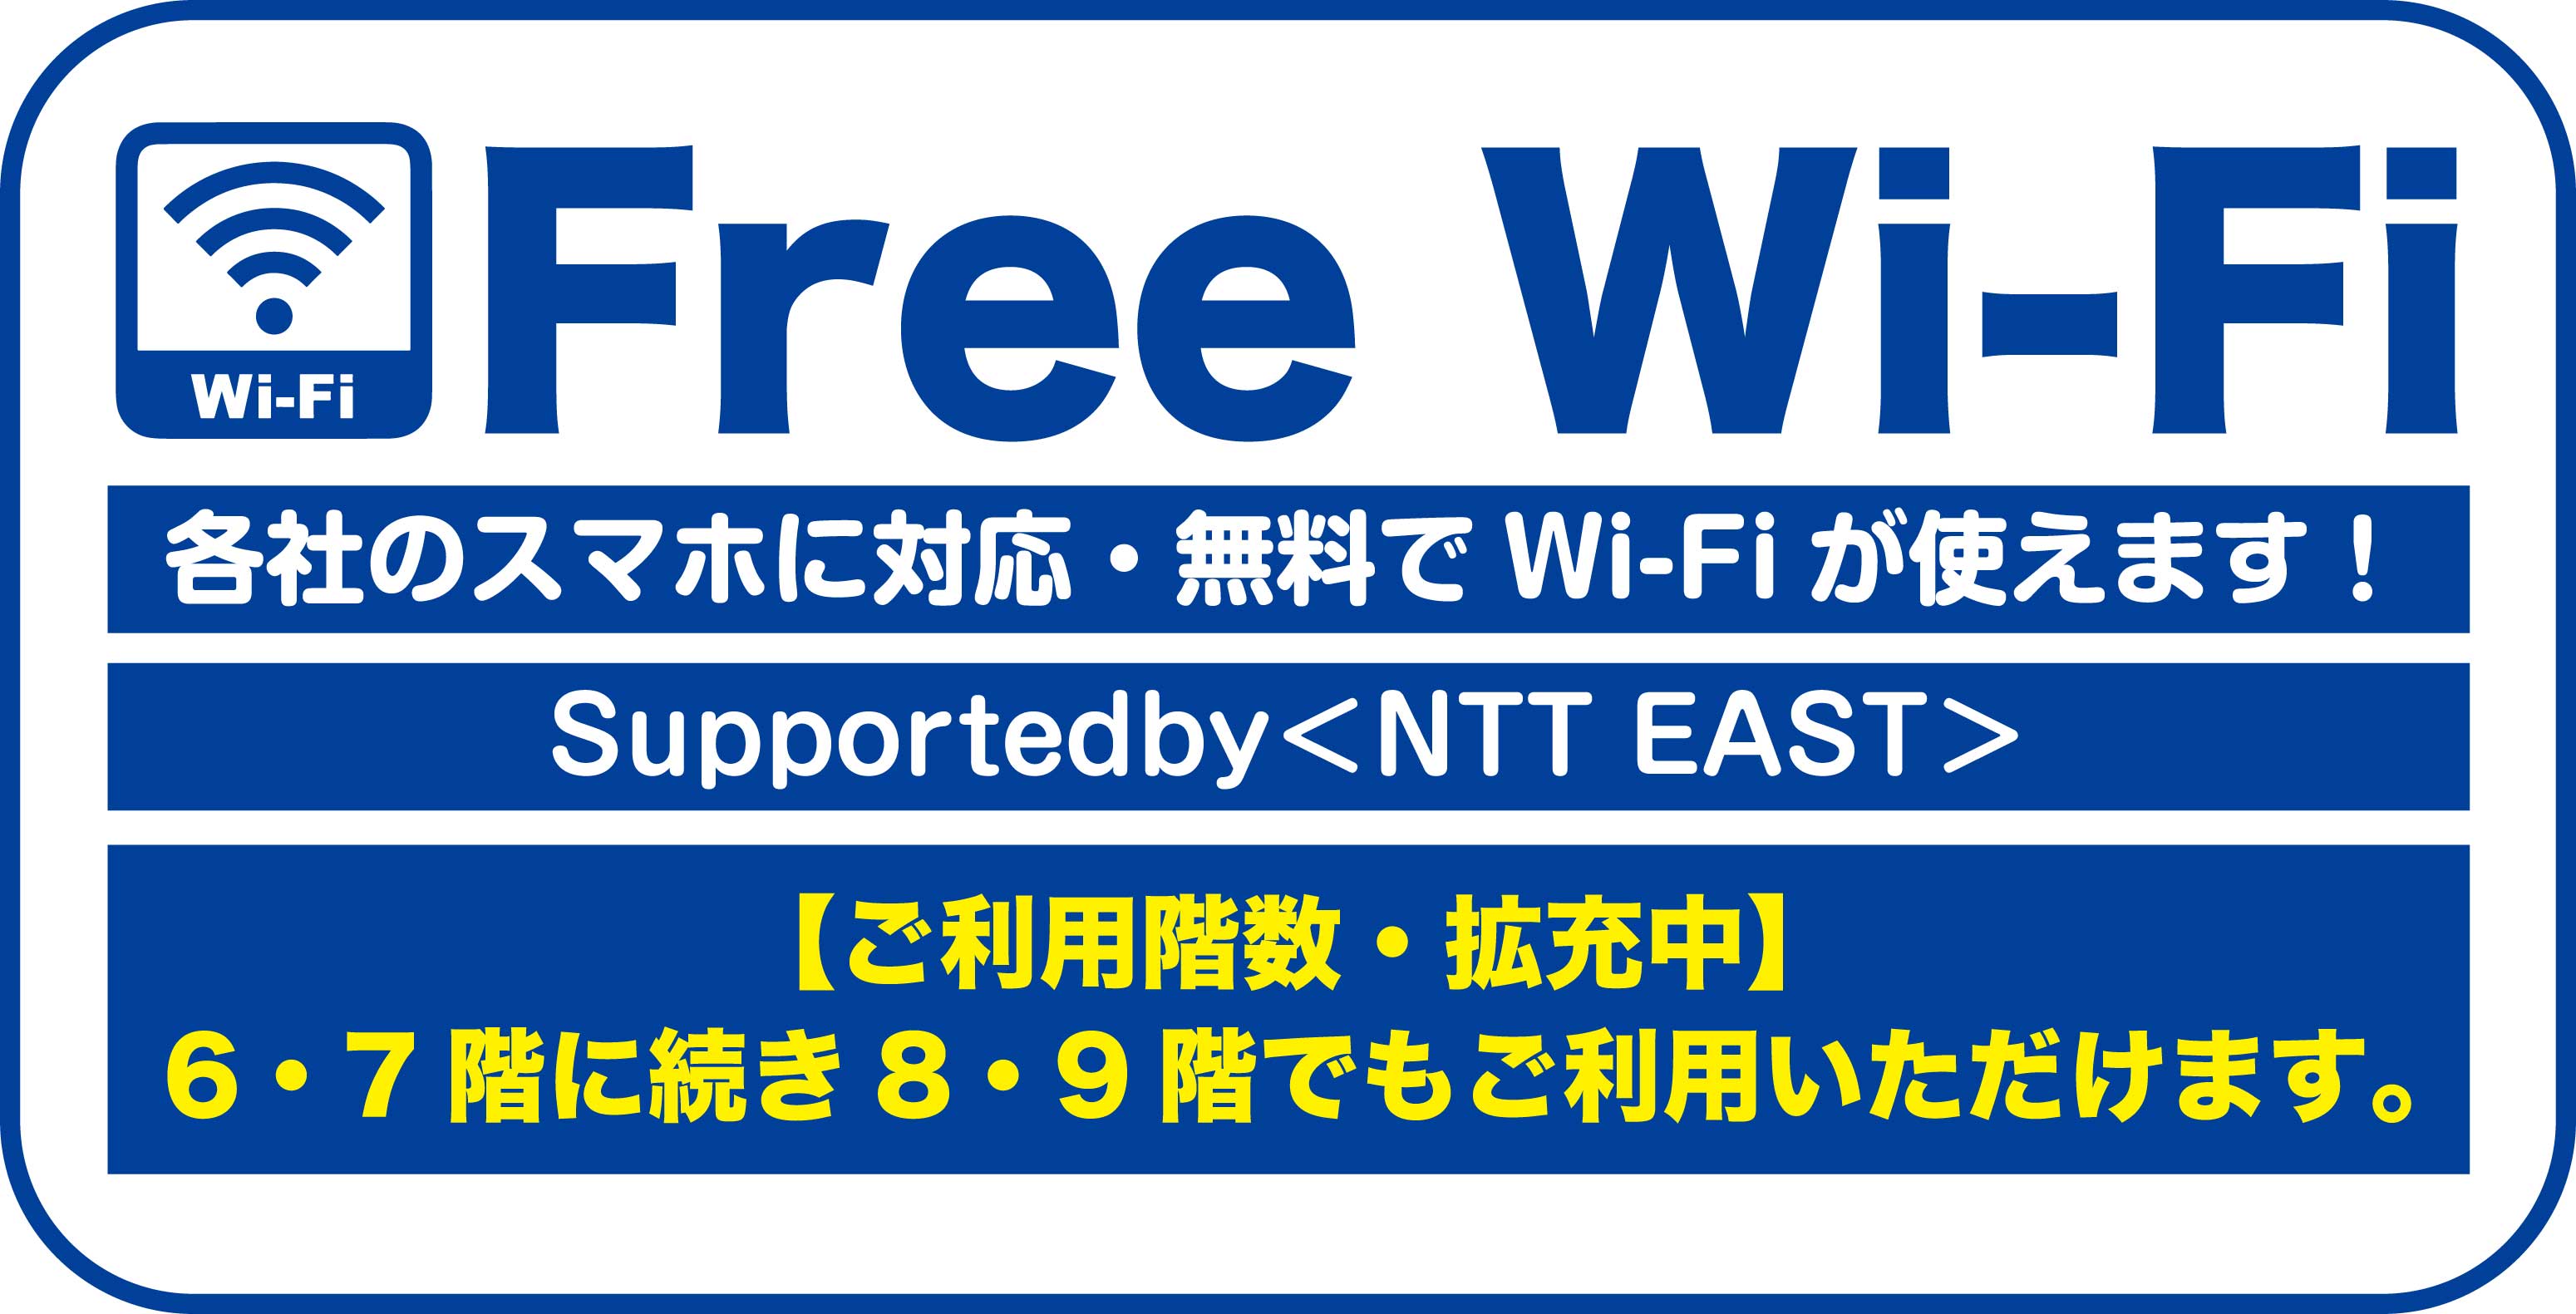  Free　WiFiのご案内